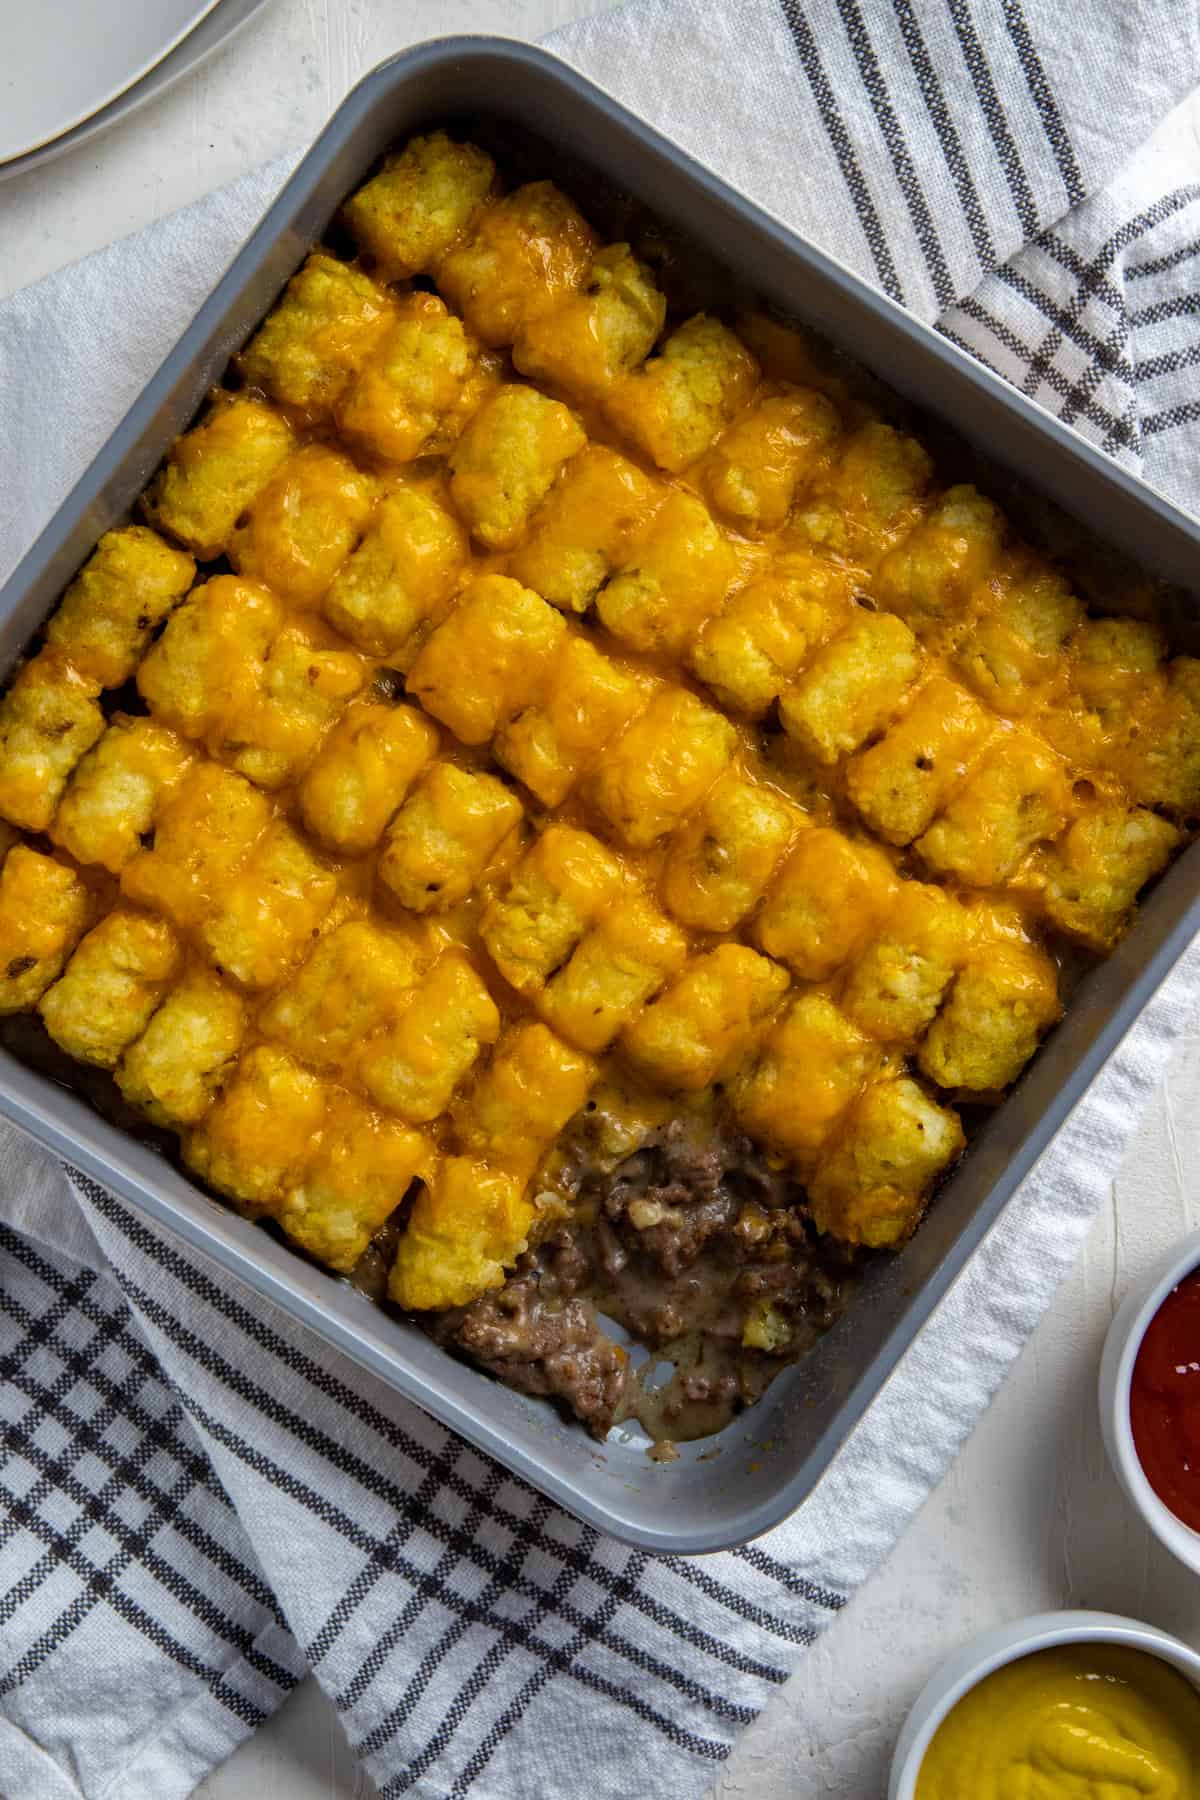 Baked tater tot casserole in square metal pan with scoop removed from corner.  Mustard and ketchup in small round white bowls on the side.